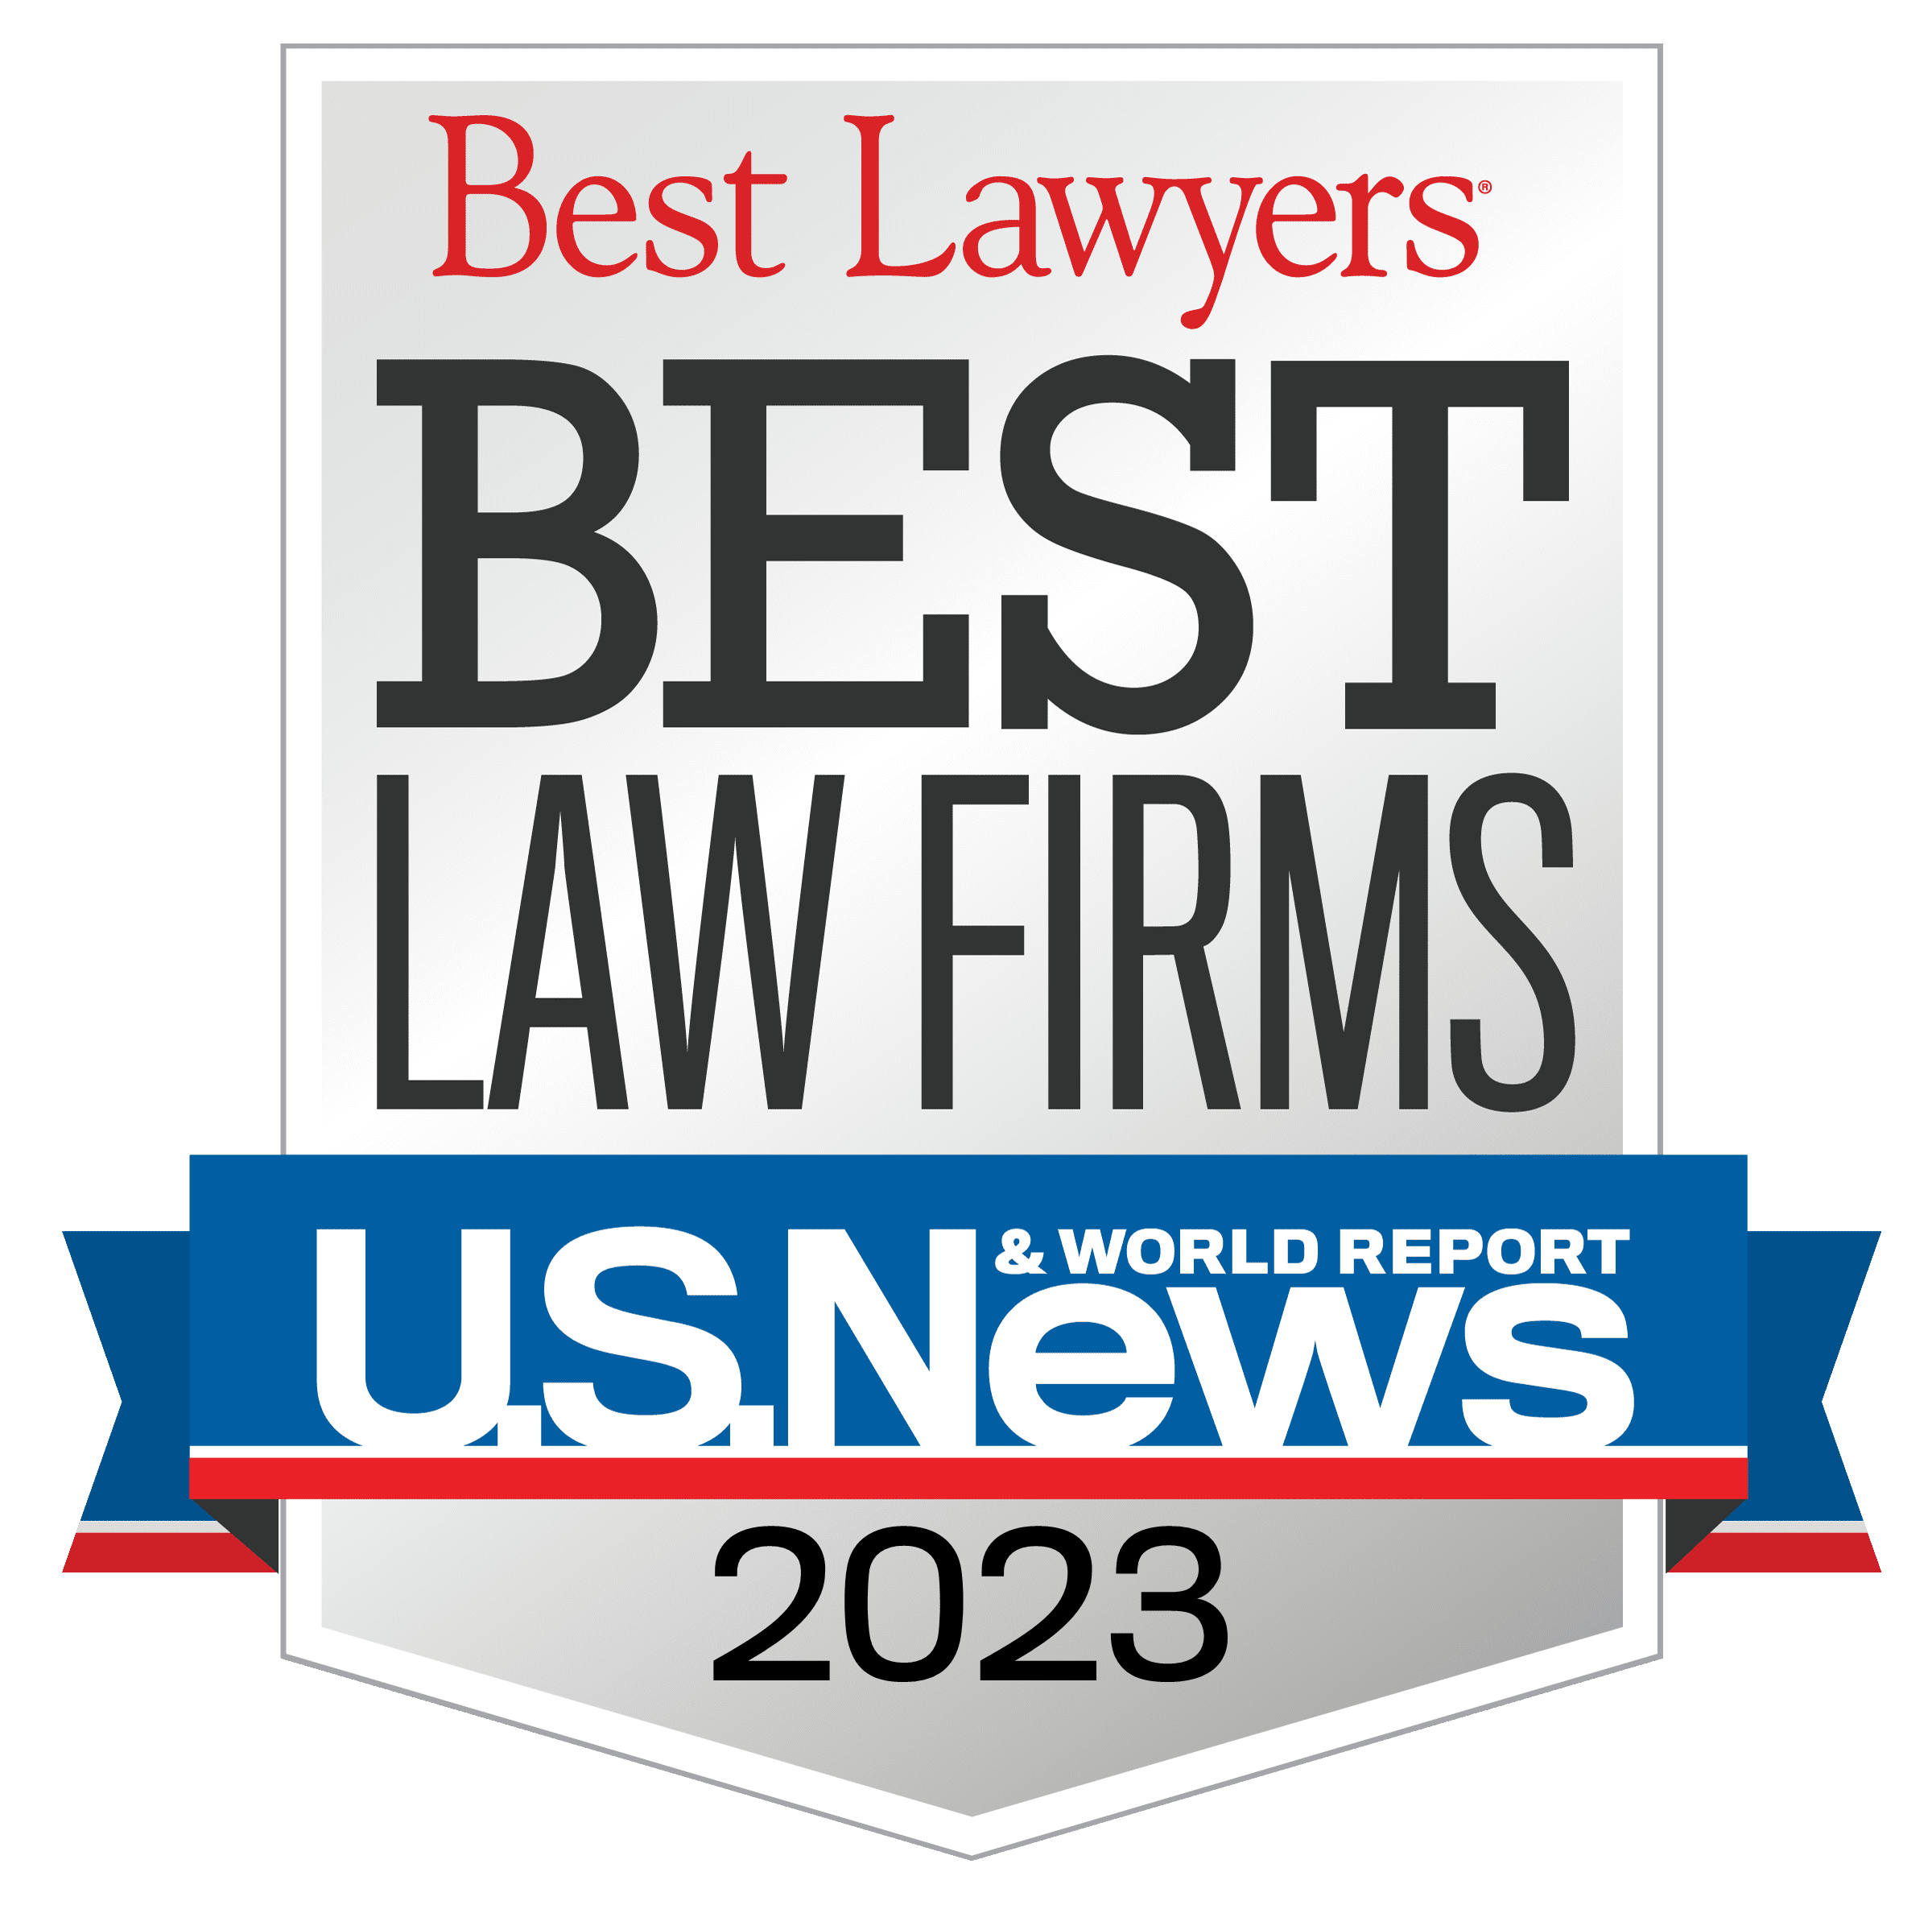 Best Law Firm award from U.S. News & World Report